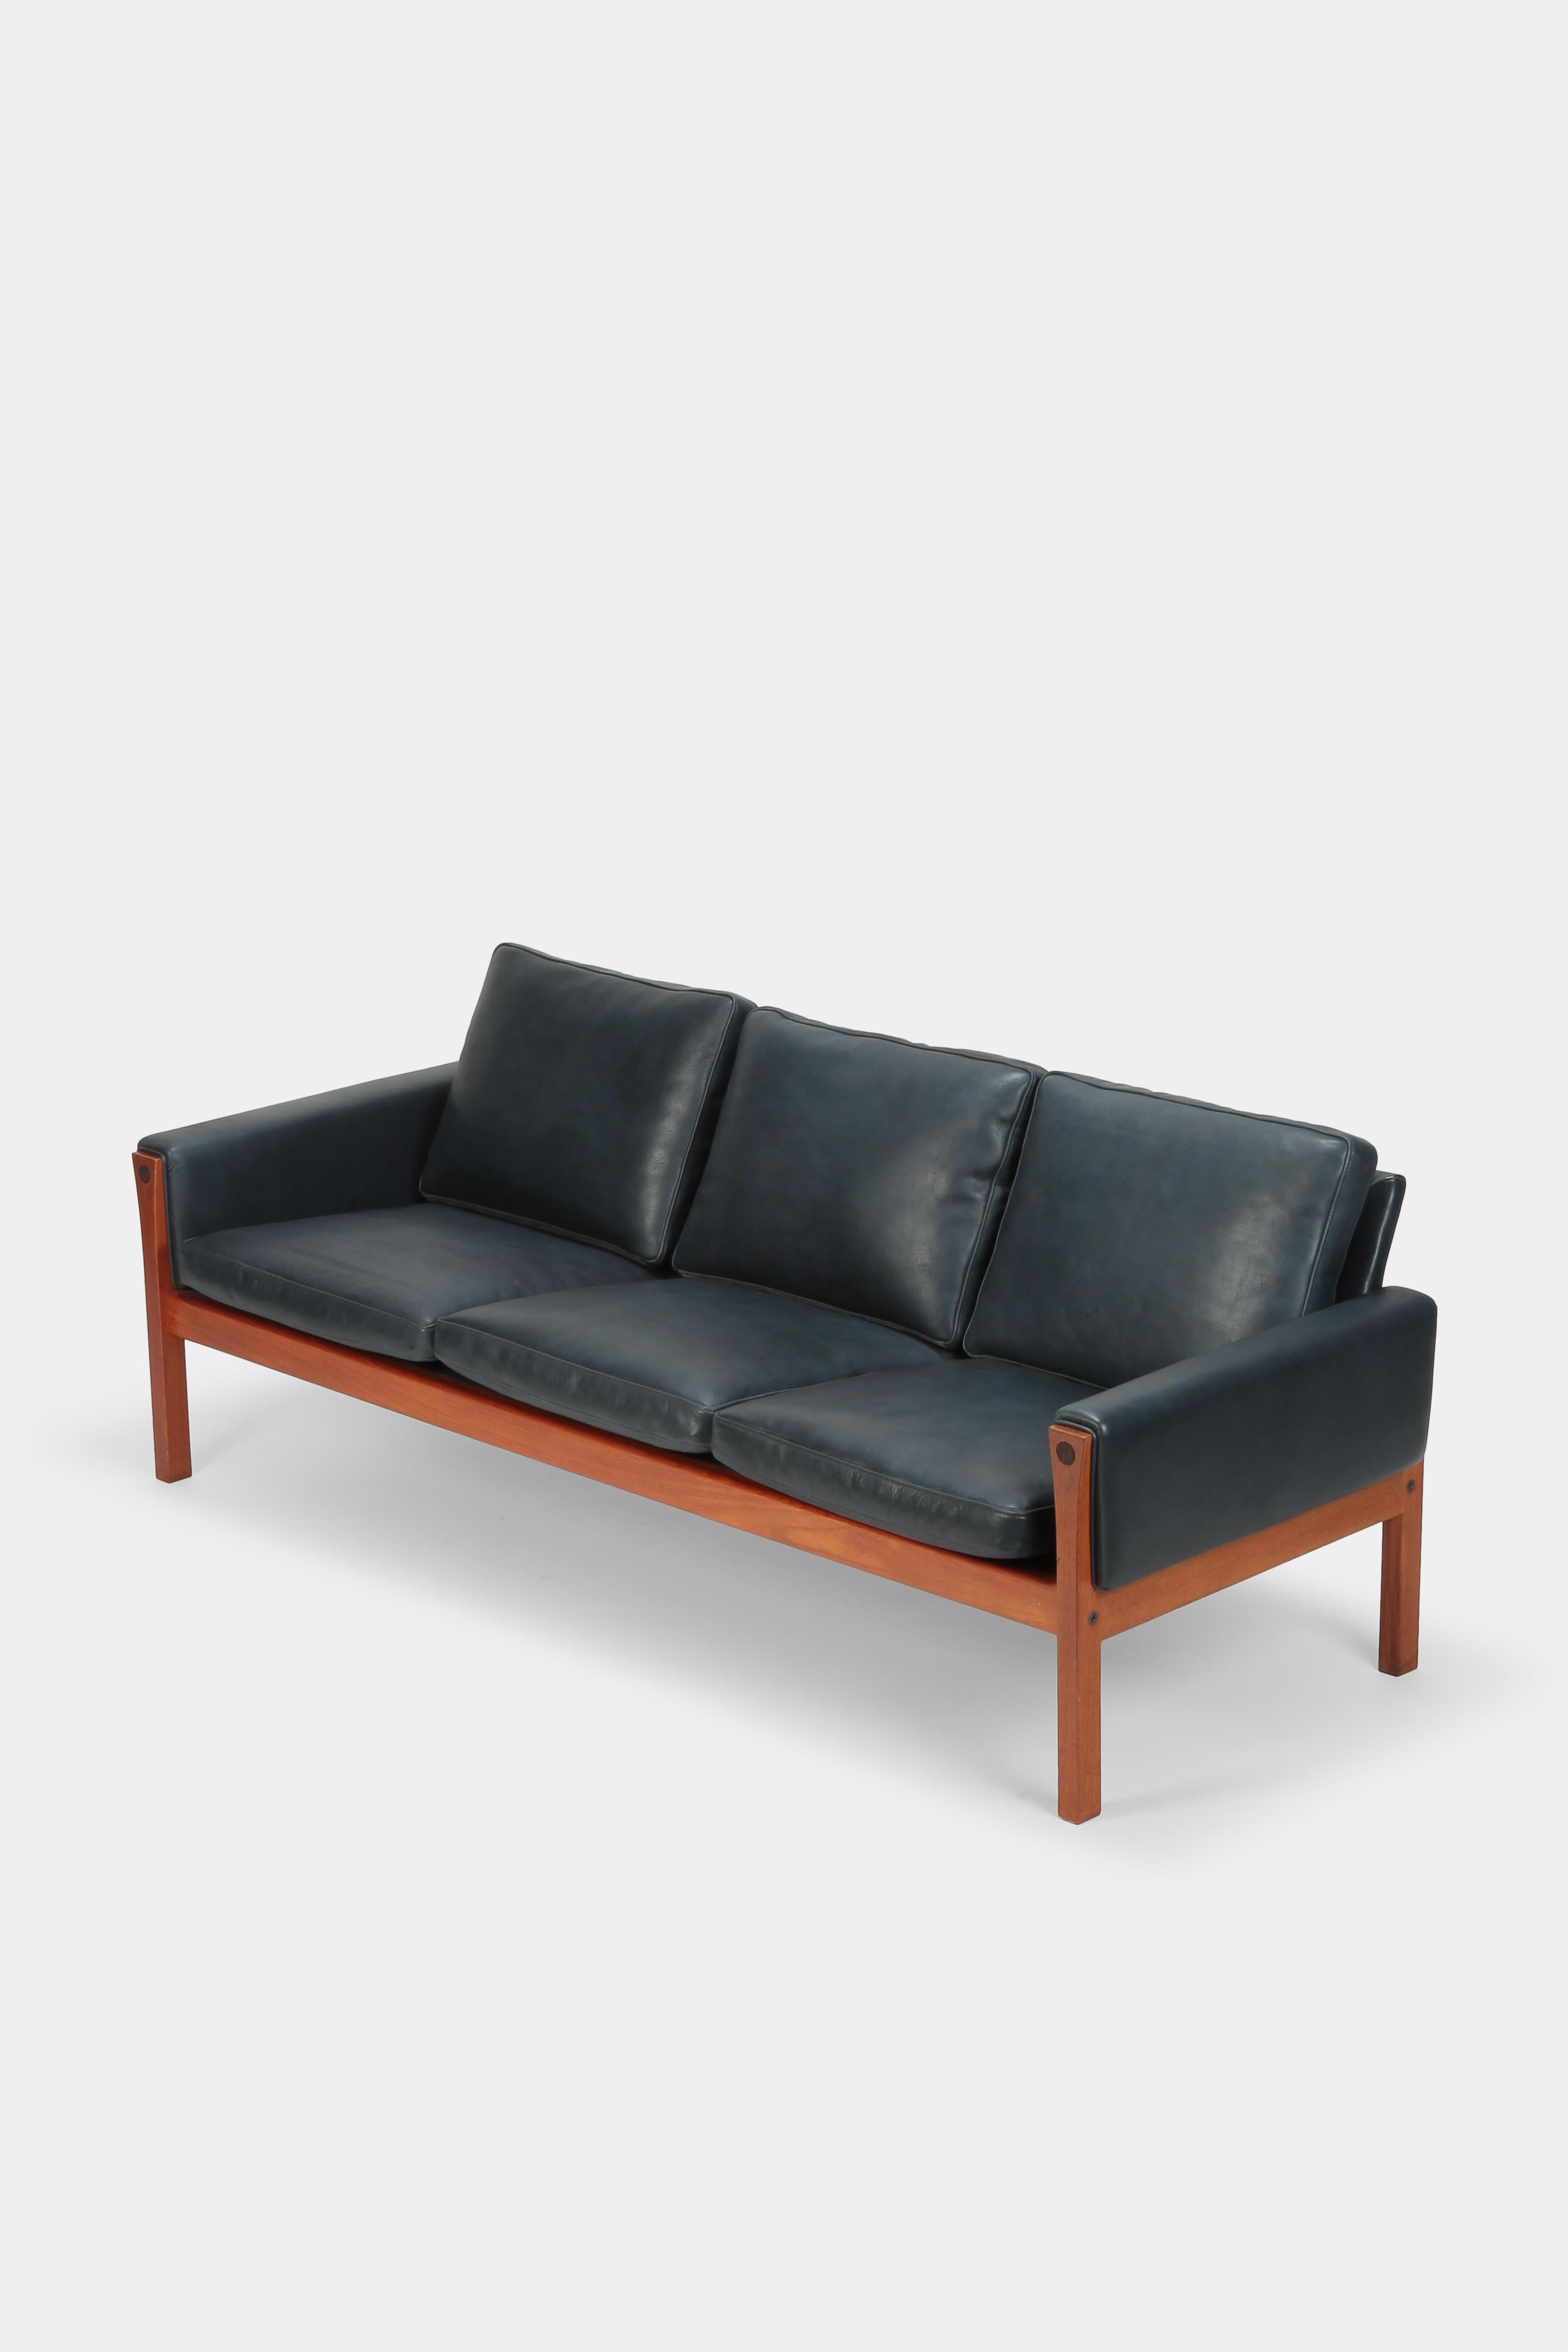 Hans Wegner for AP Stolen, manufactured in Denmark in the 1960s. Typically understated design by the Danish master, sleek and reduced lines, luxuriously covered with the finest leather (also manufactured in the nineteen sixties). Supremely